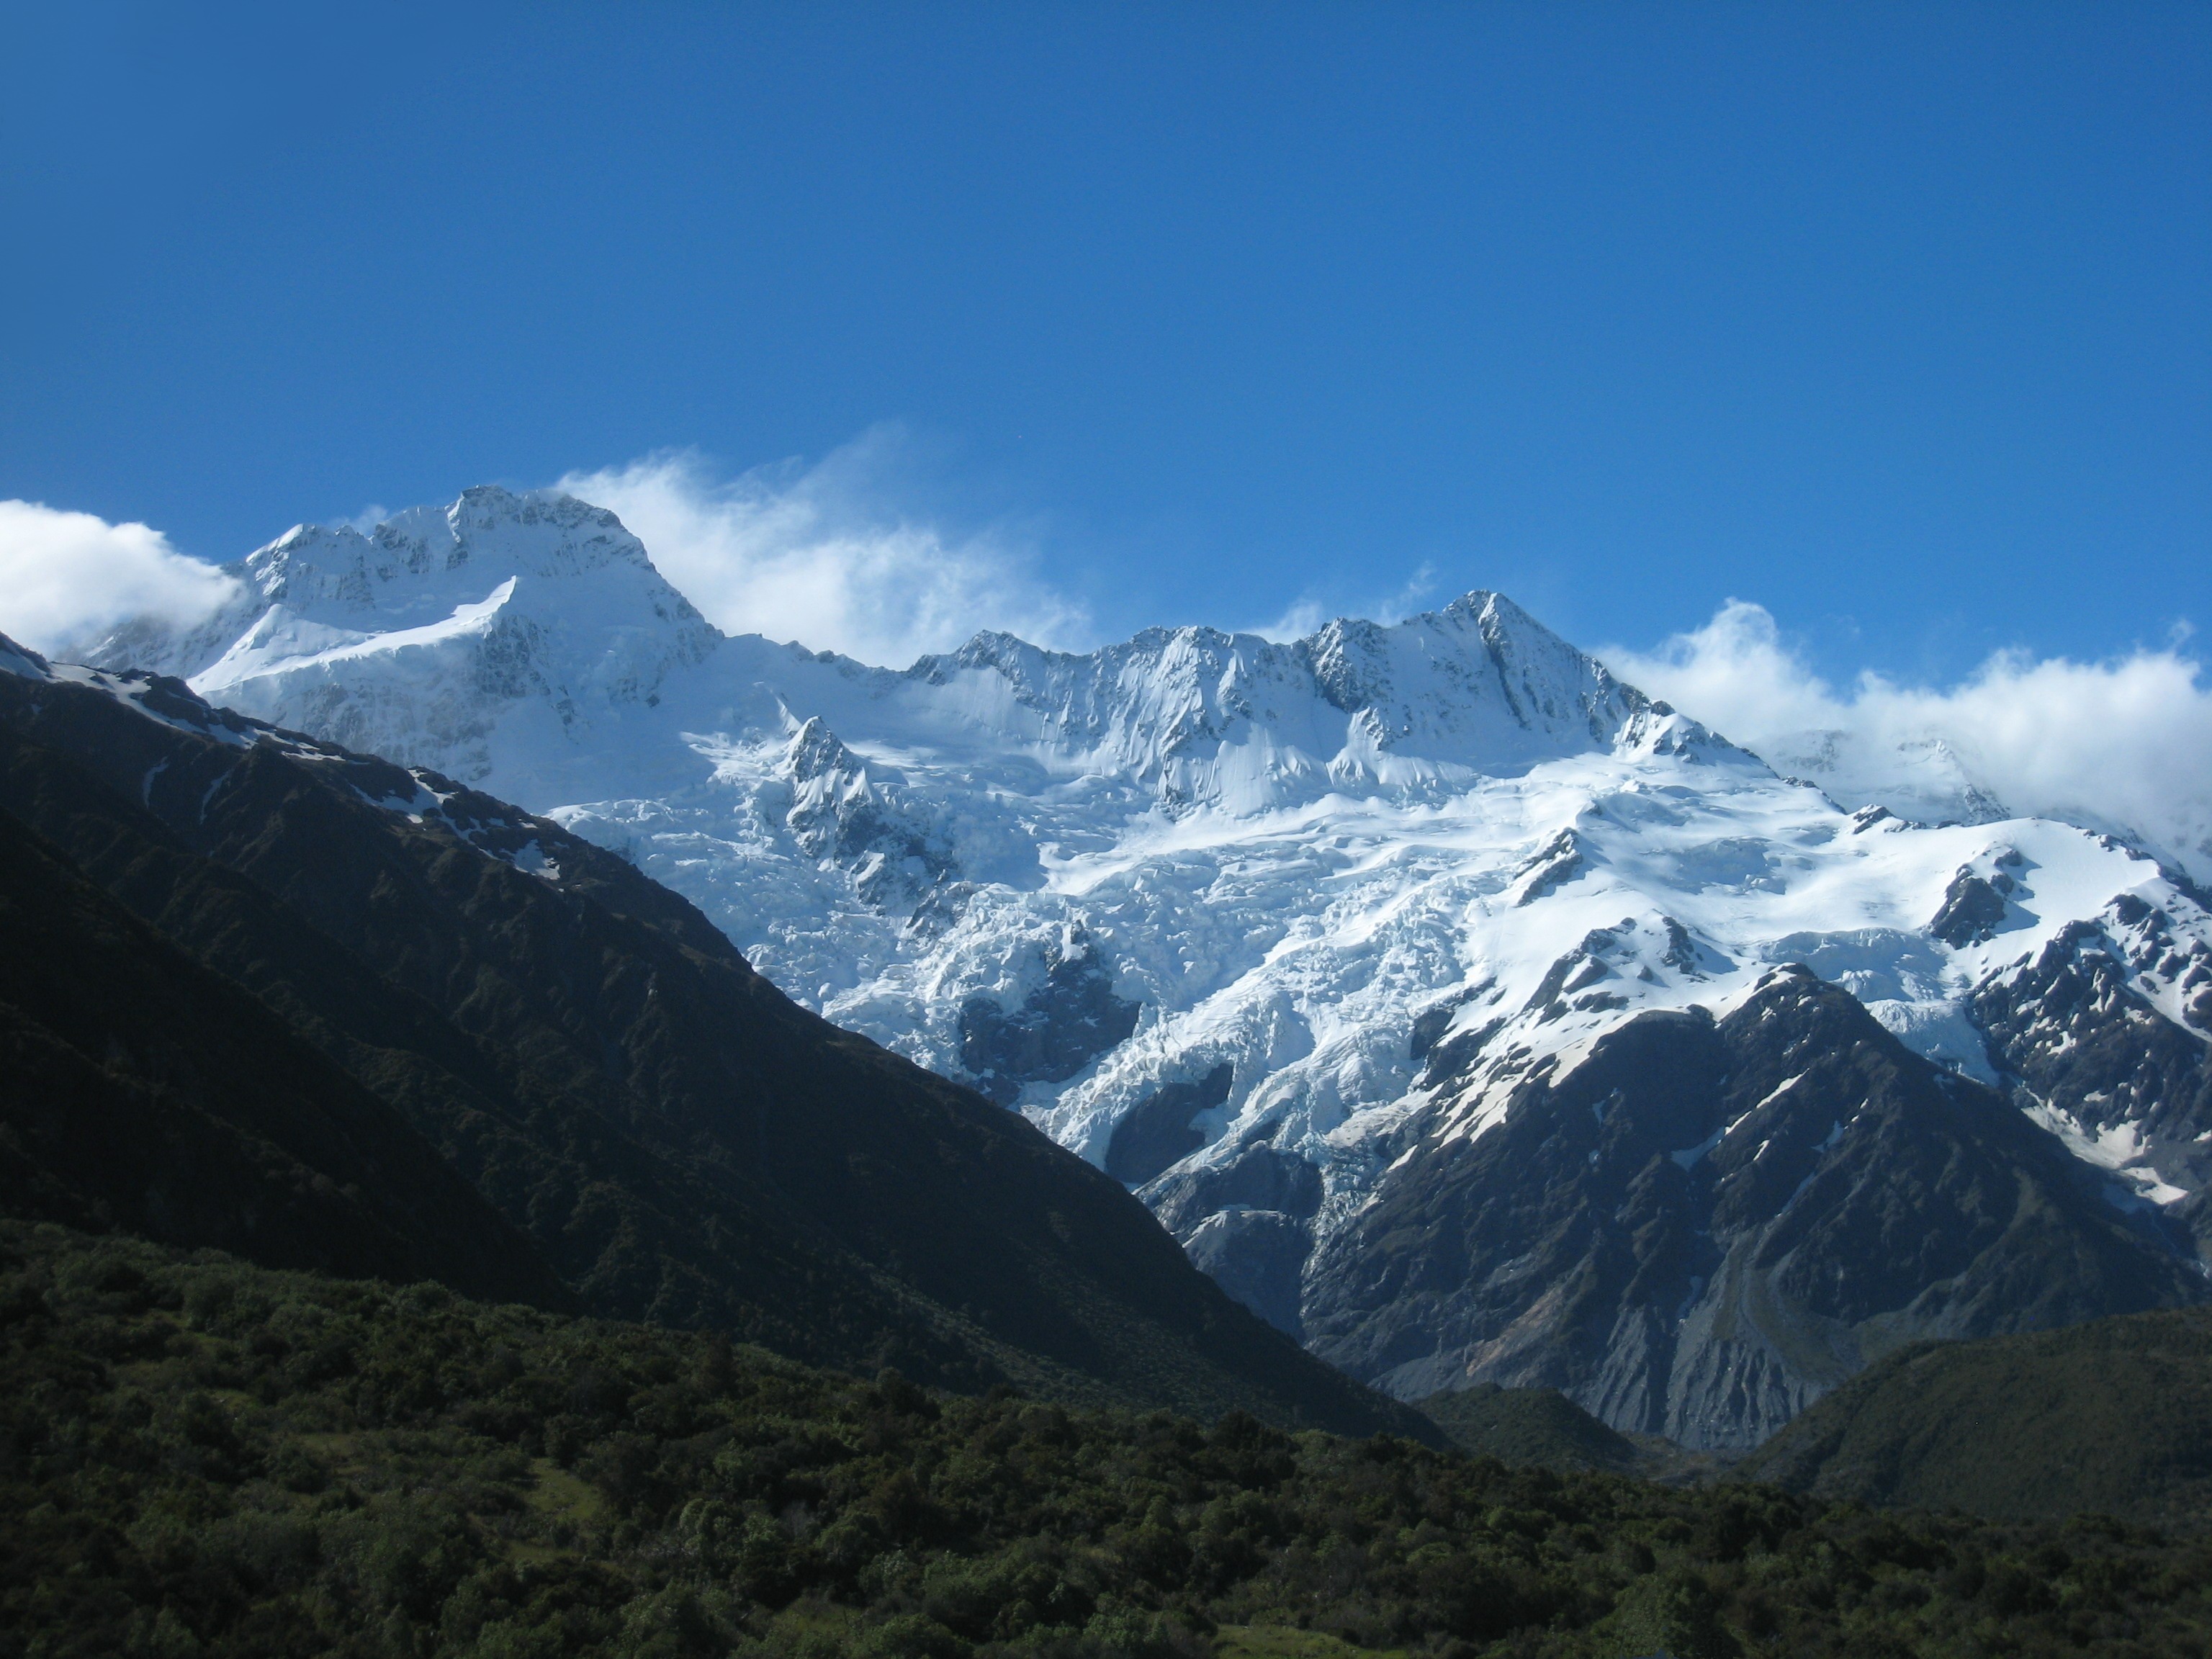 Mount Sefton and the Footstool 2